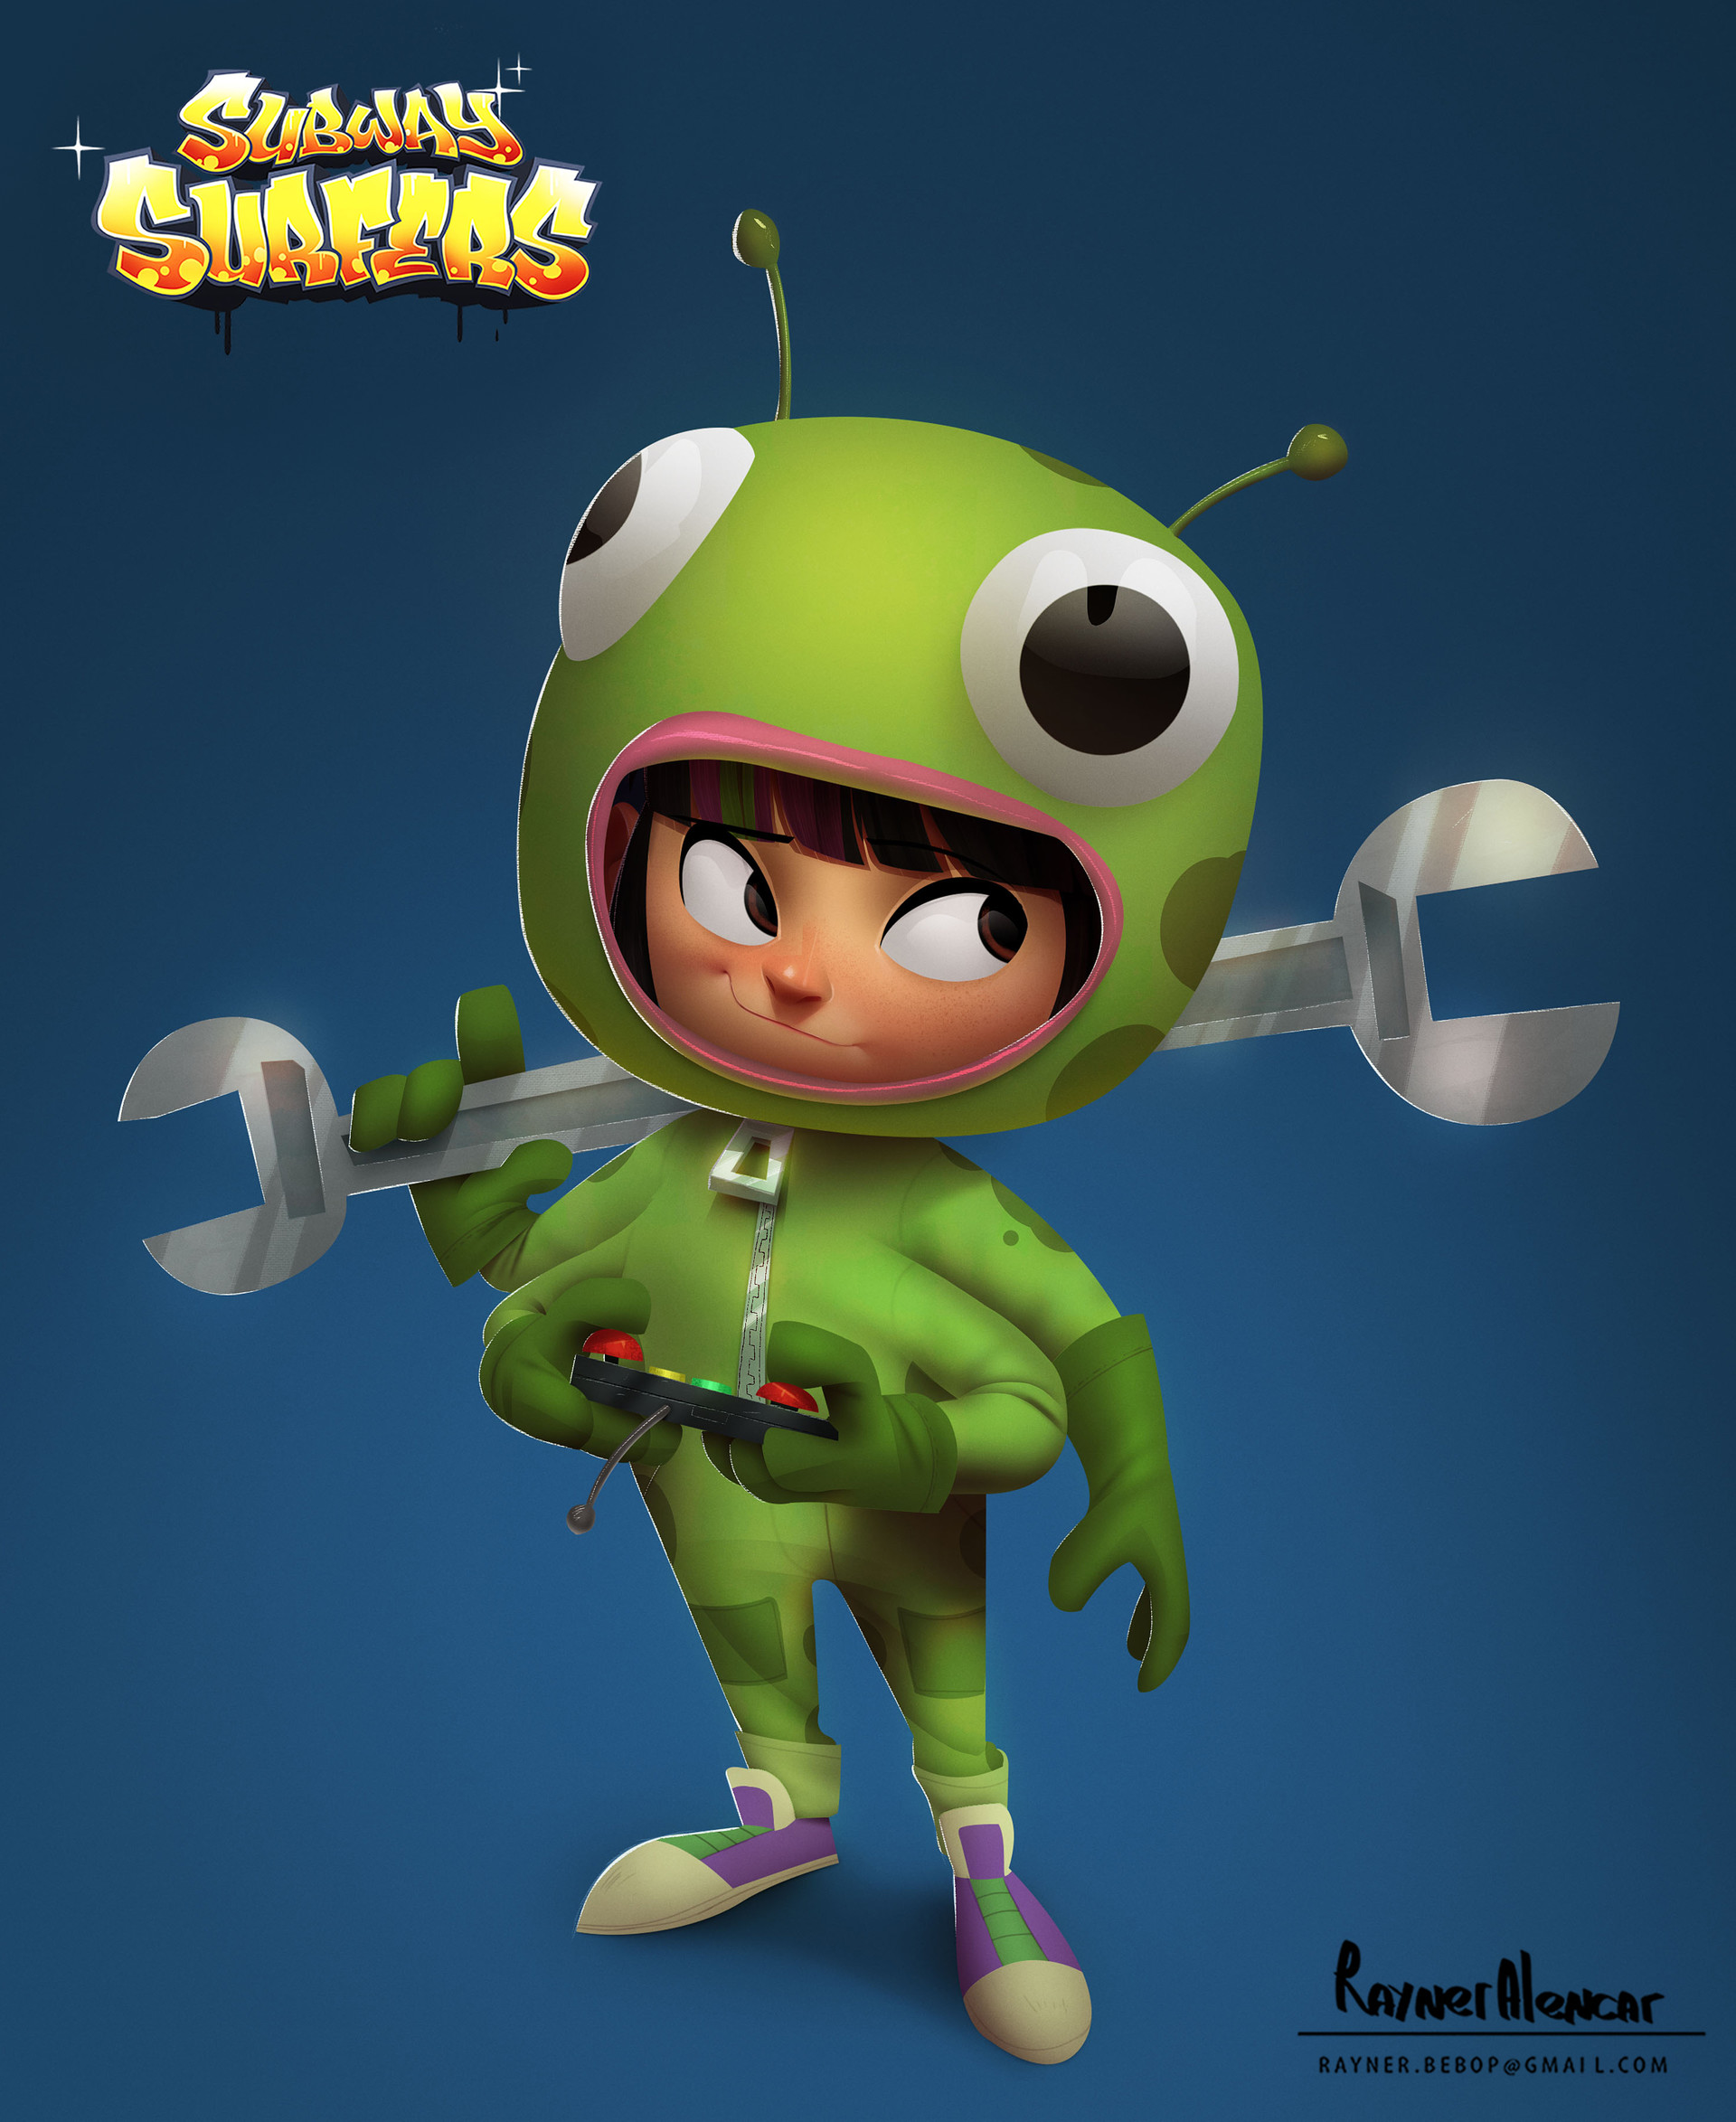 Subway Surfers on X: #conceptclass 8: interested in concept art